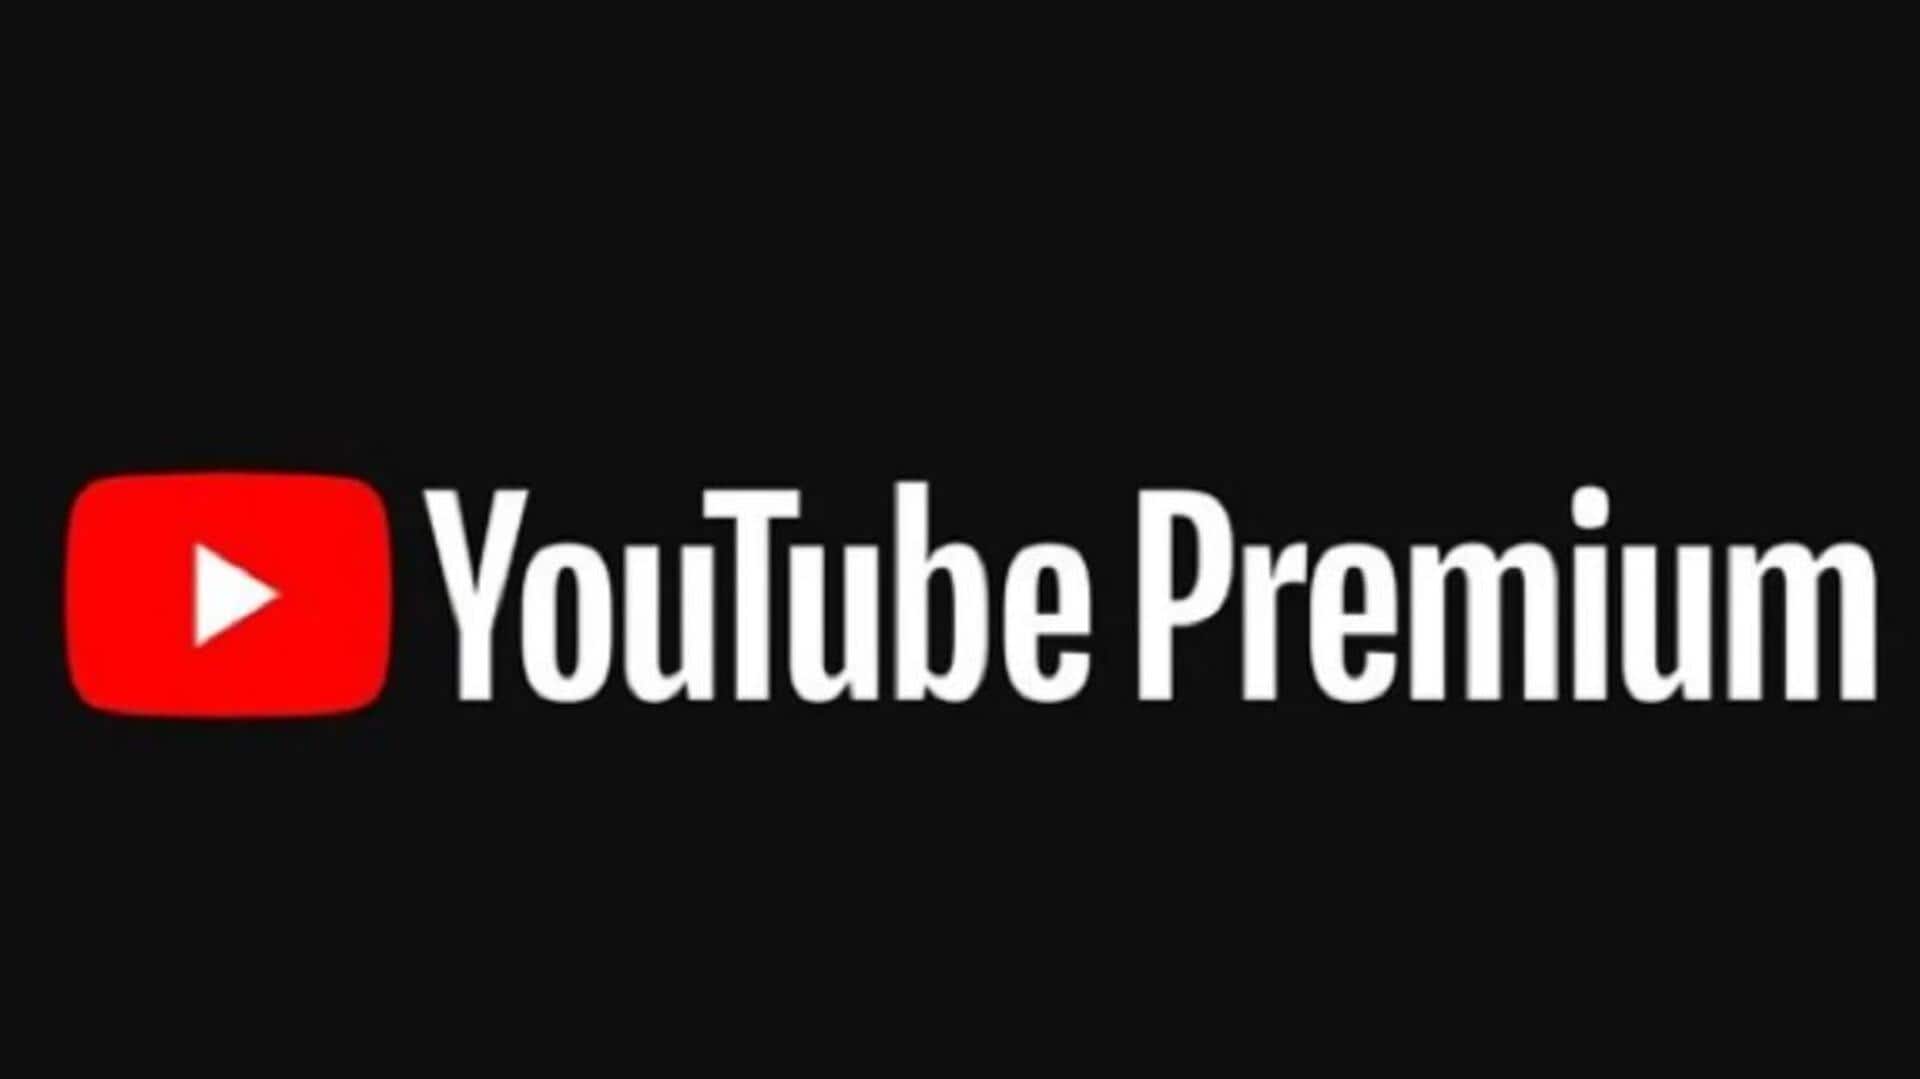 After US, YouTube Premium hikes prices in several more countries